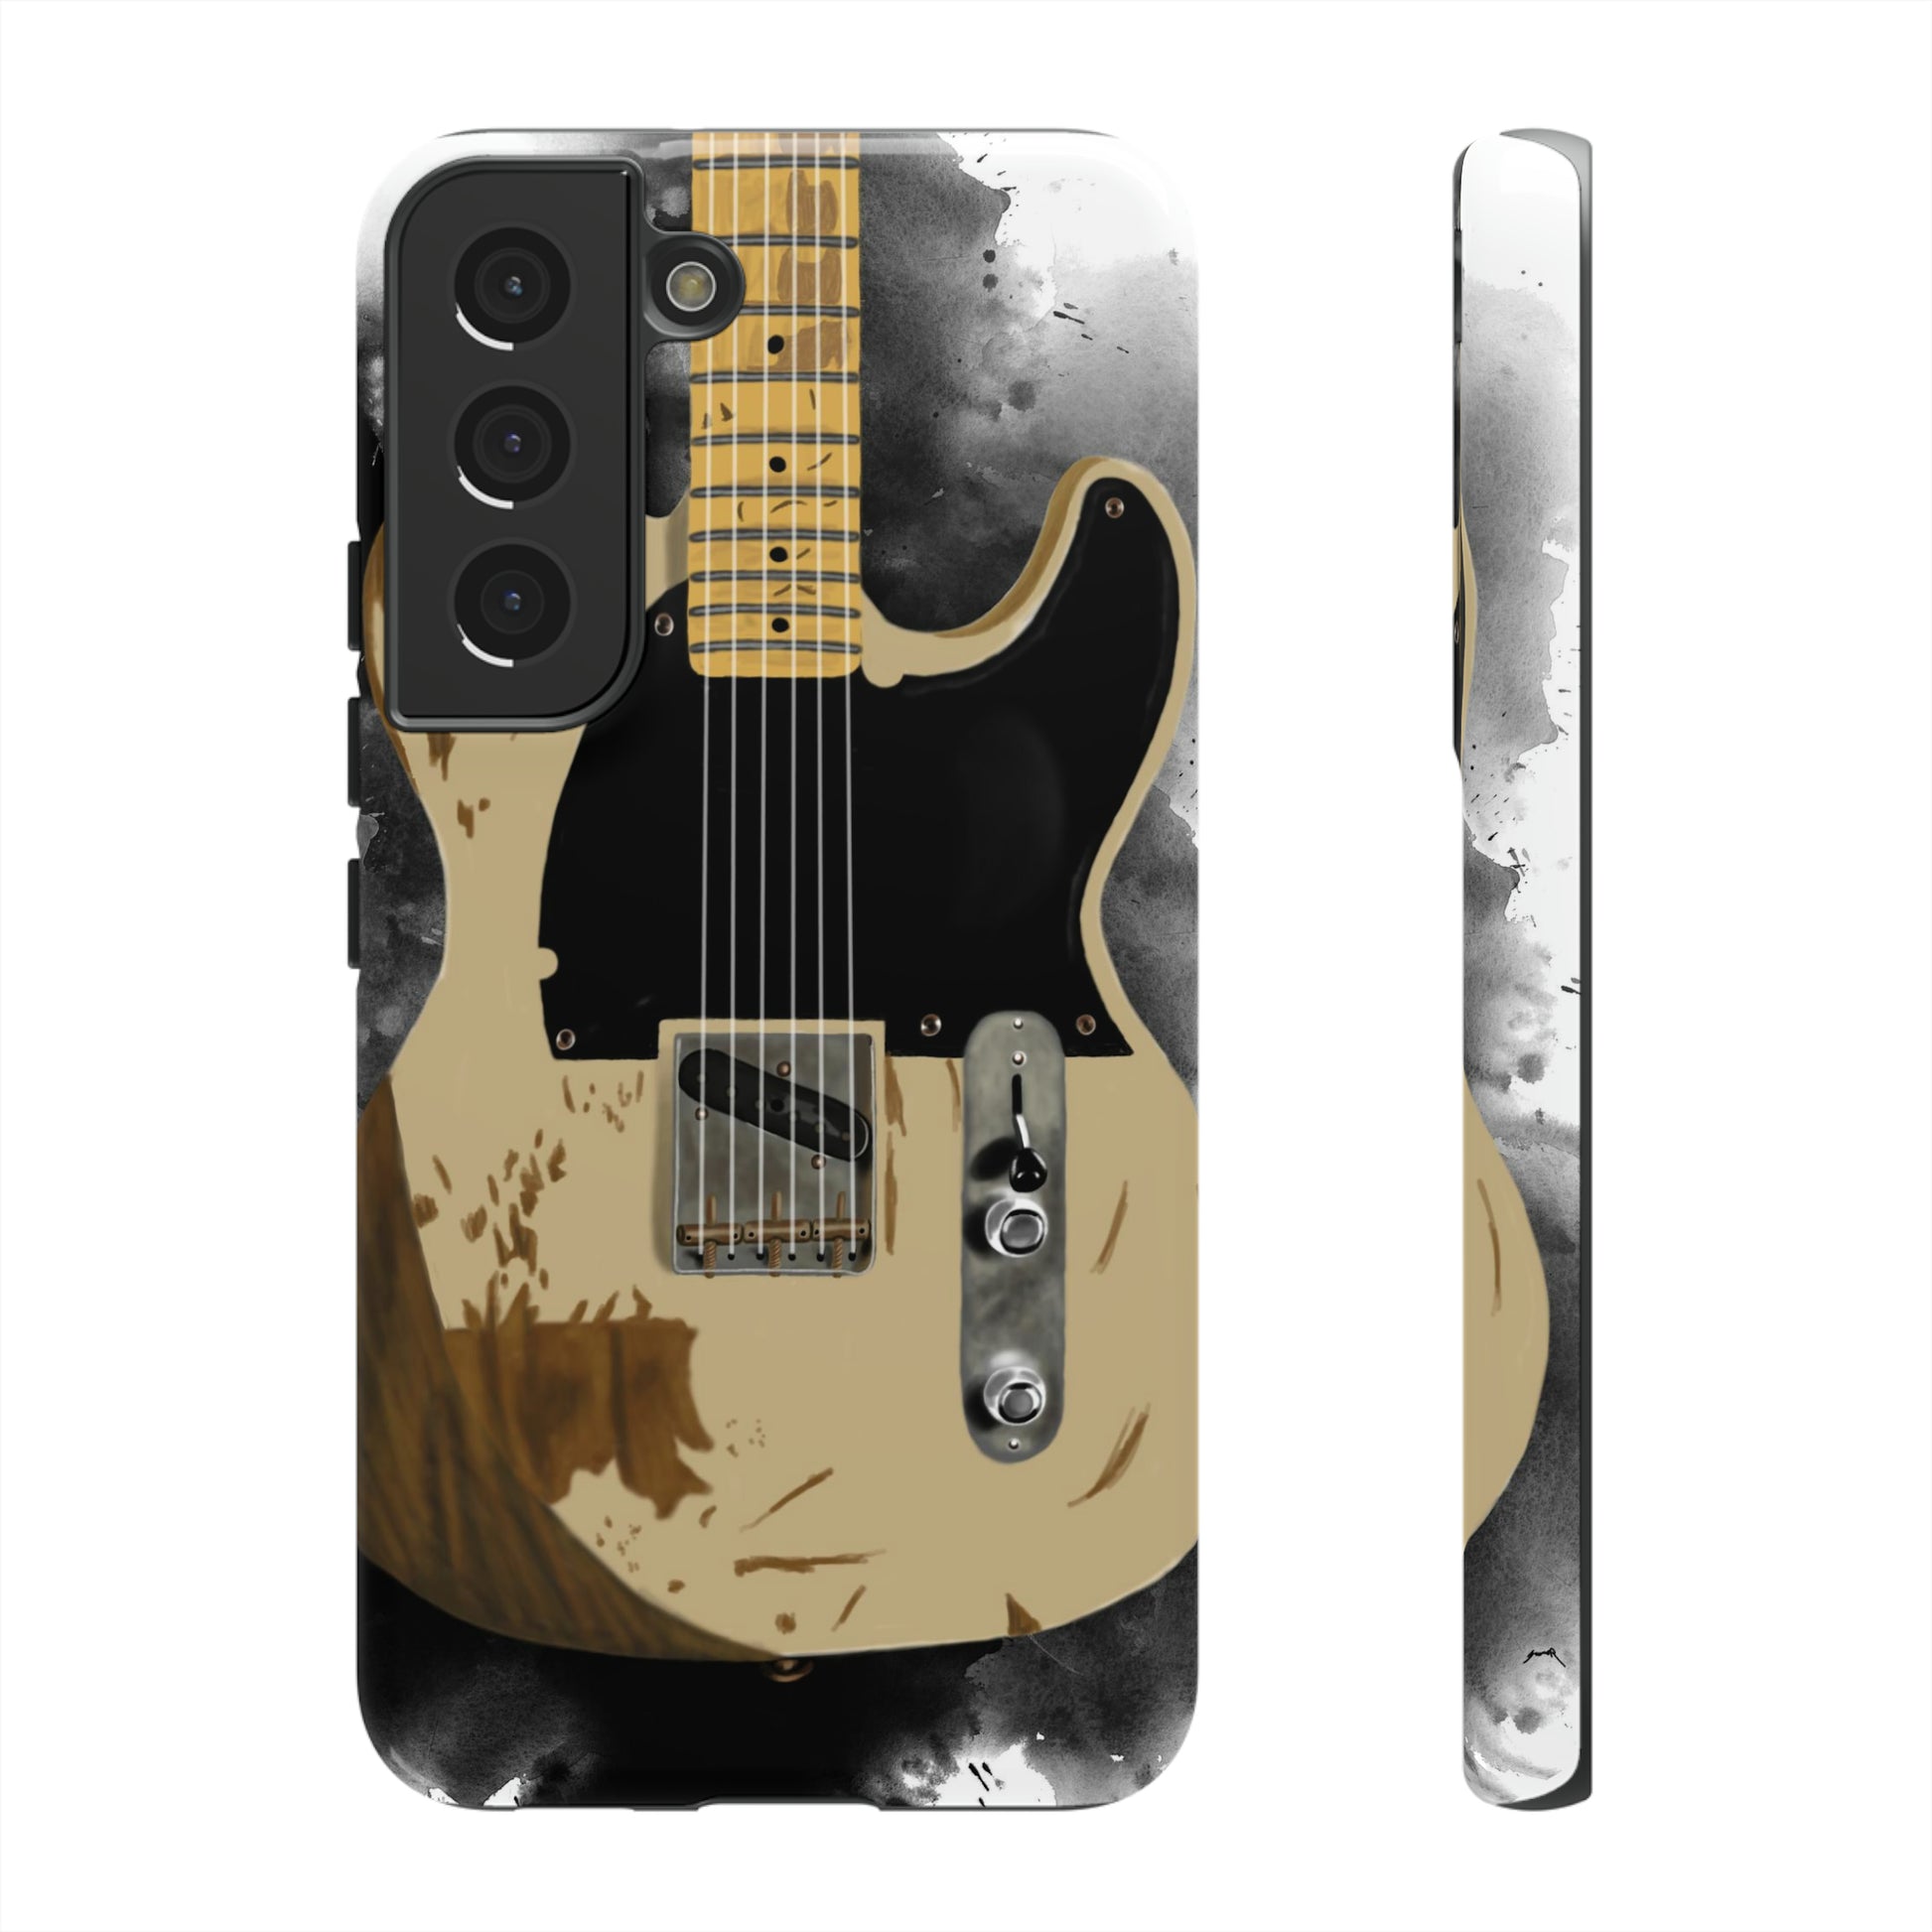 Digital painting of a white-black vintage electric guitar printed on a samsung phone case